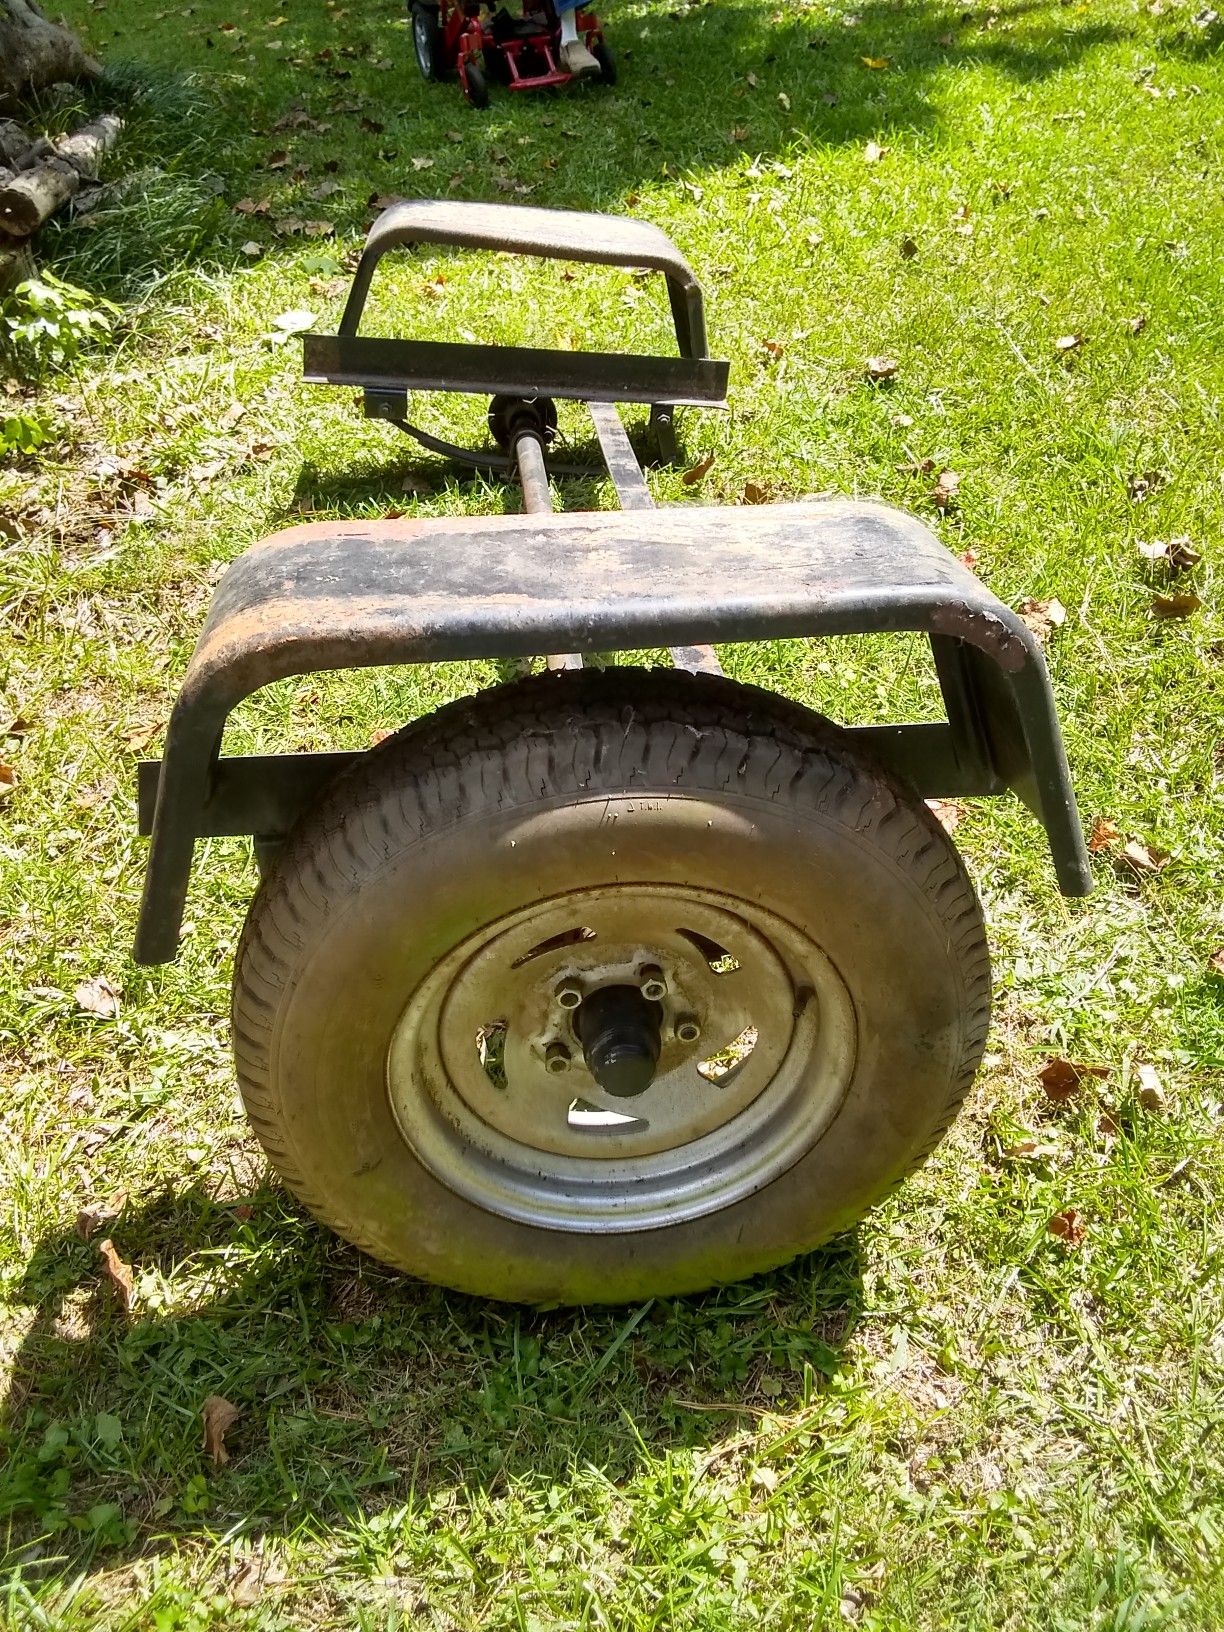 5 lug trailer axle with leaf springs, fenders and 1 tire